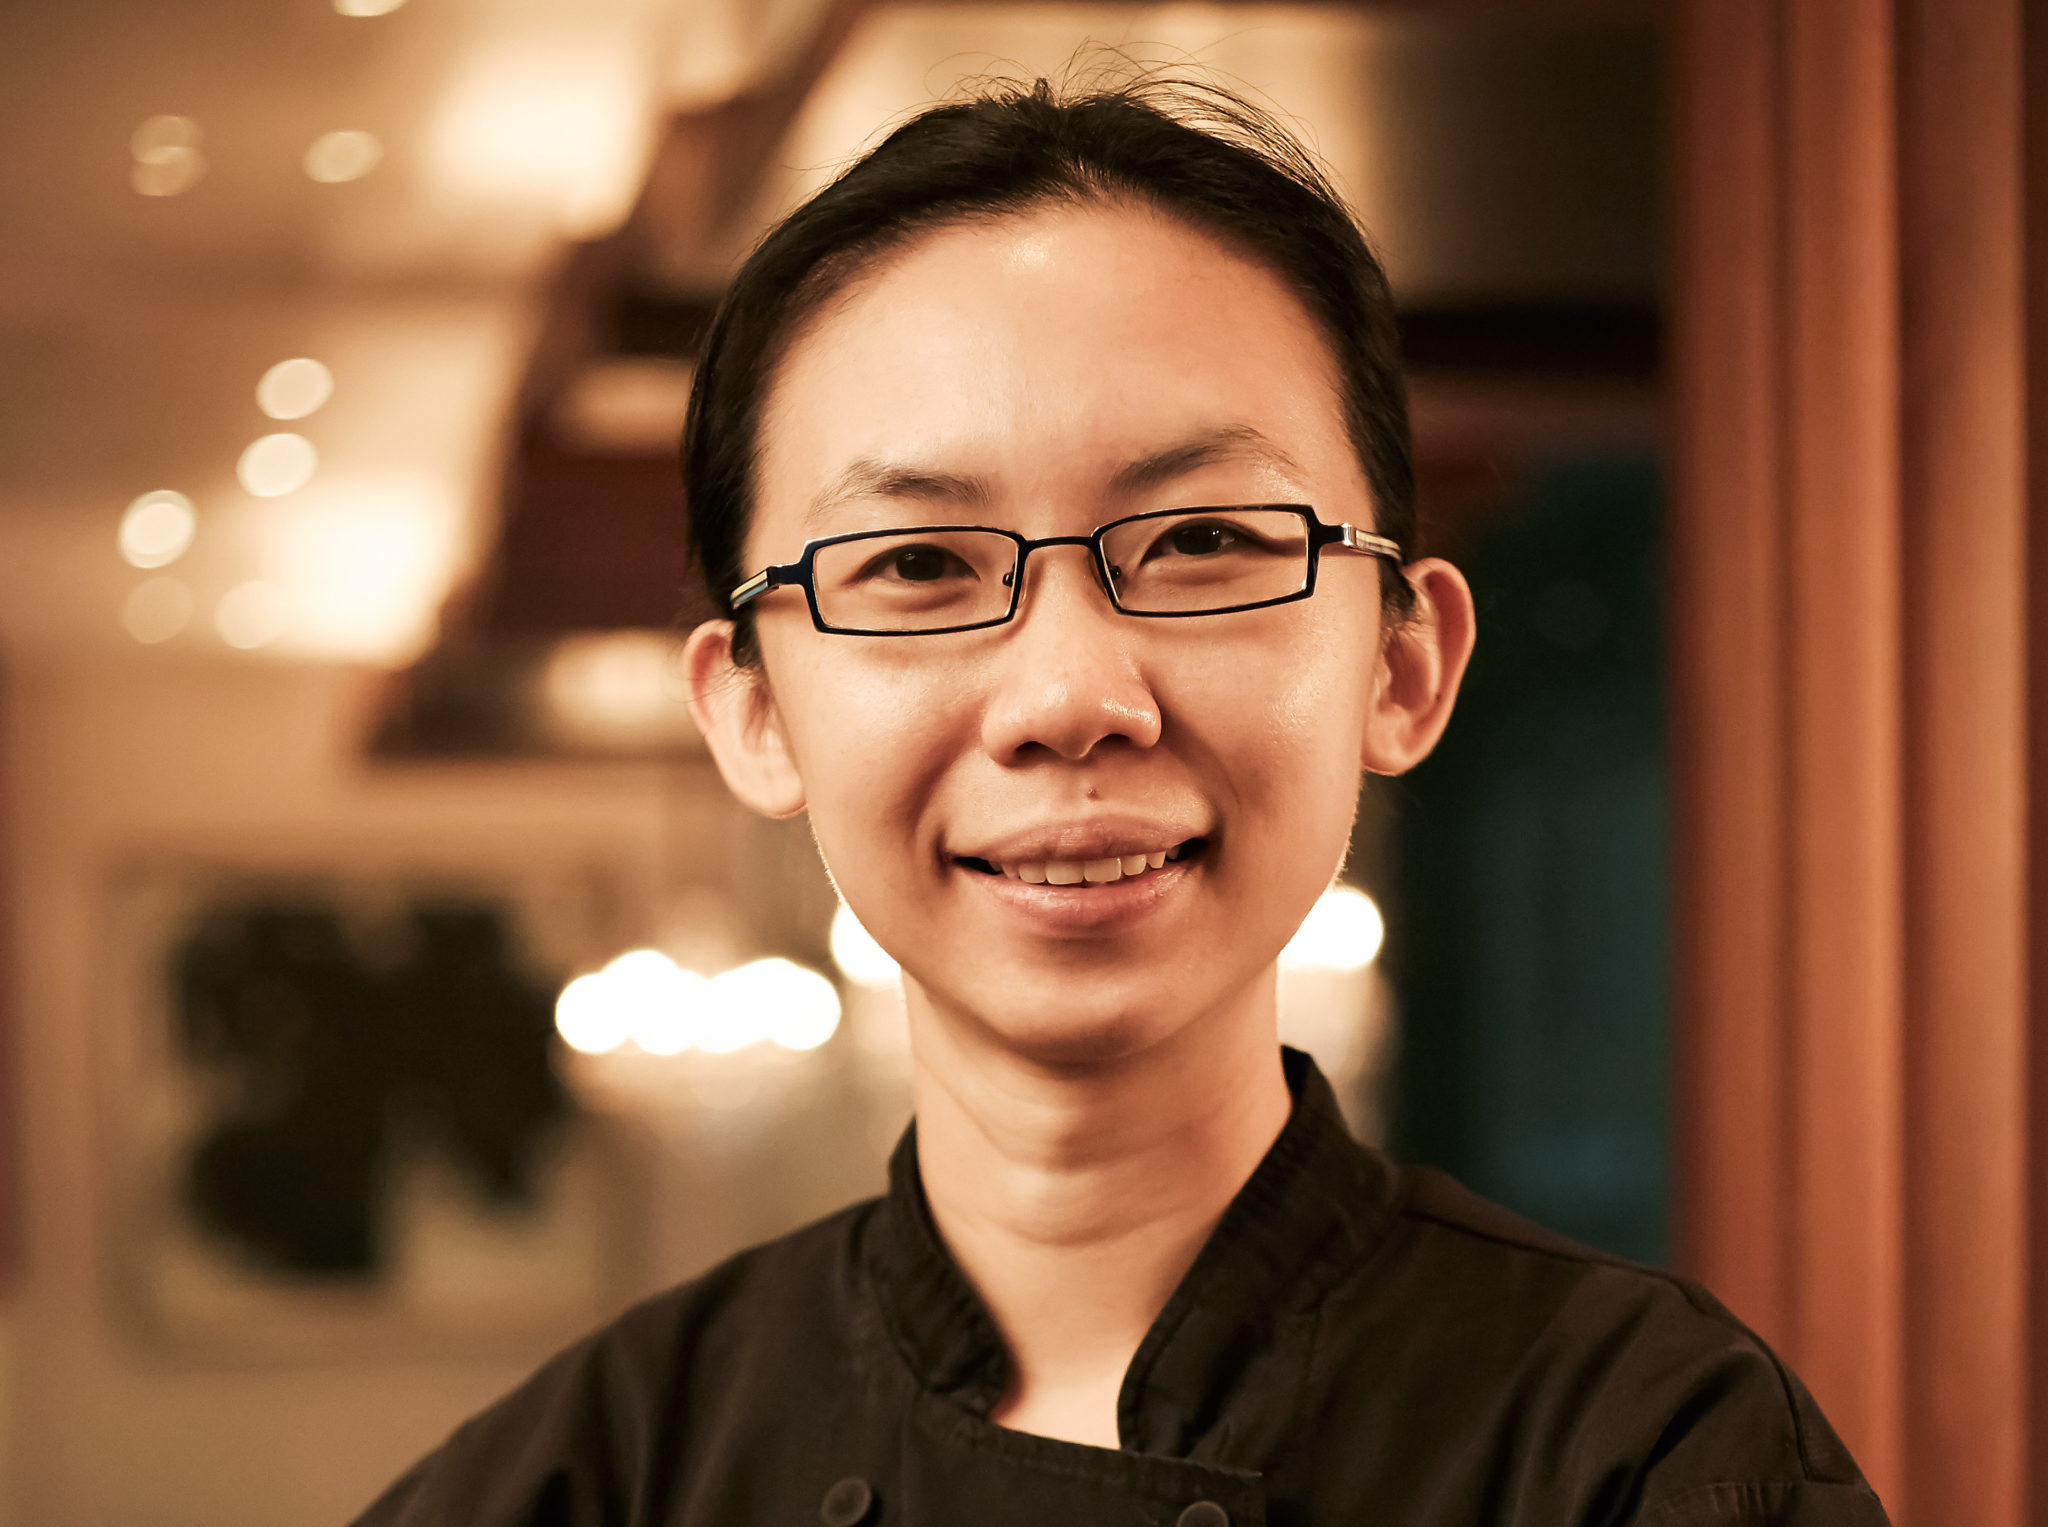 Asia's Best Pastry Chef 2016 Cheryl Koh is making Singapore and the rest of Asia a little sweeter with her creations